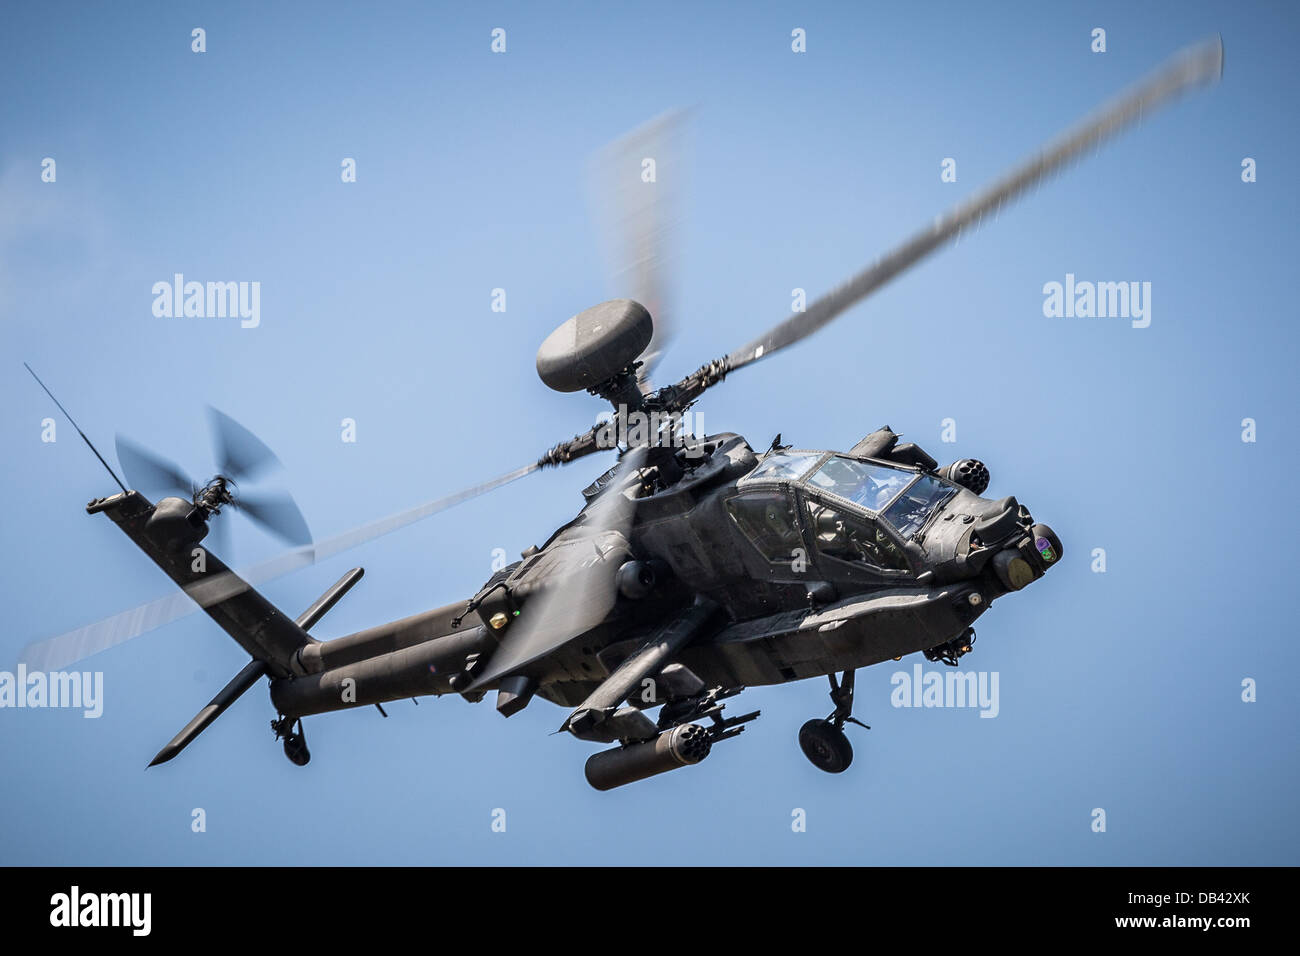 An AH-54D Apache helicopter. Stock Photo